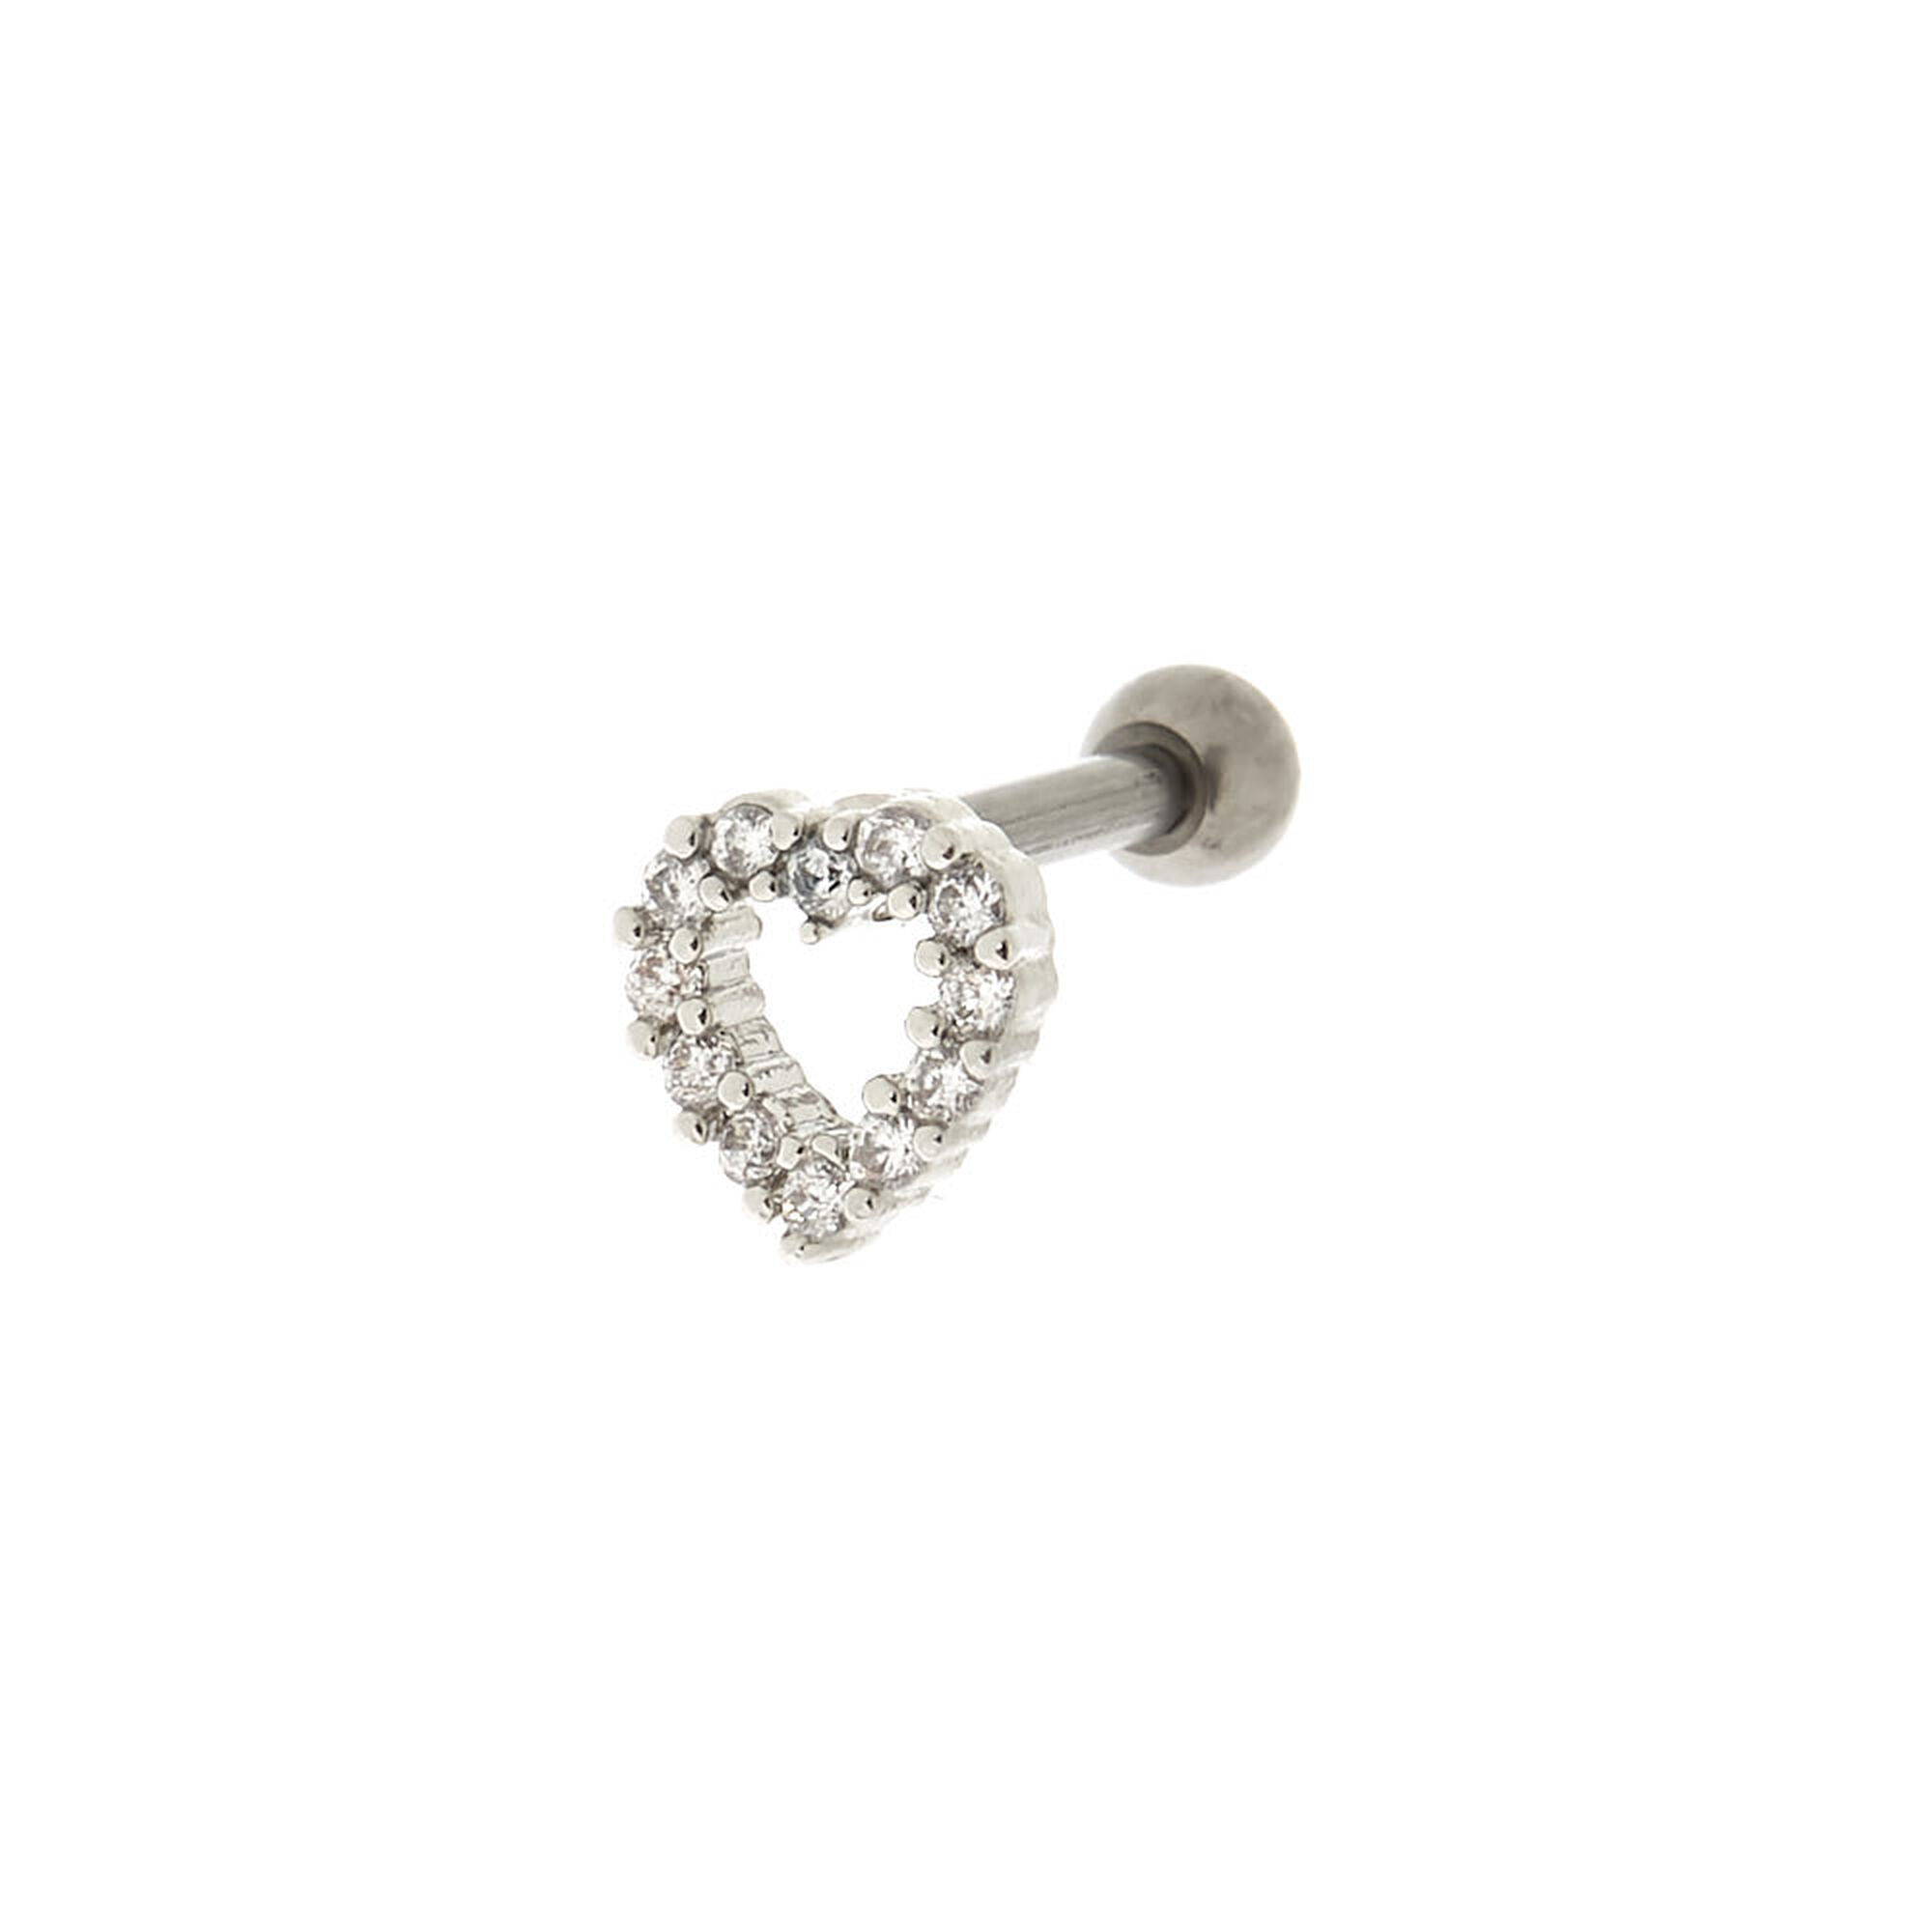 View Claires Titanium 14G Embellished Heart Cartilage Earring Silver information